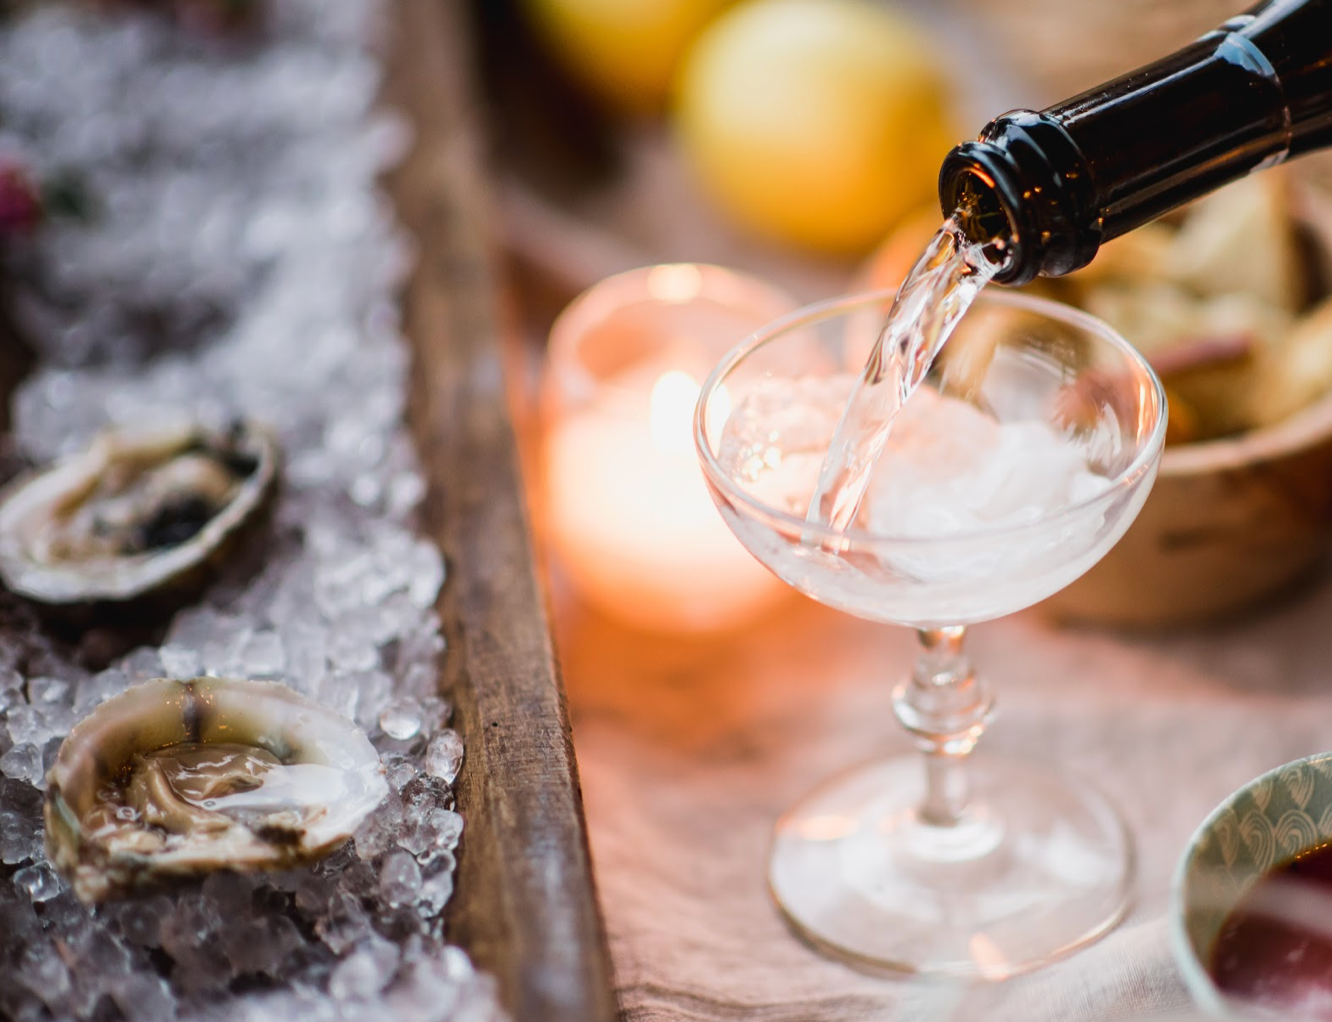 Here is some help Choosing a light refreshing wine to go with your fresh shucked or grilled oysters